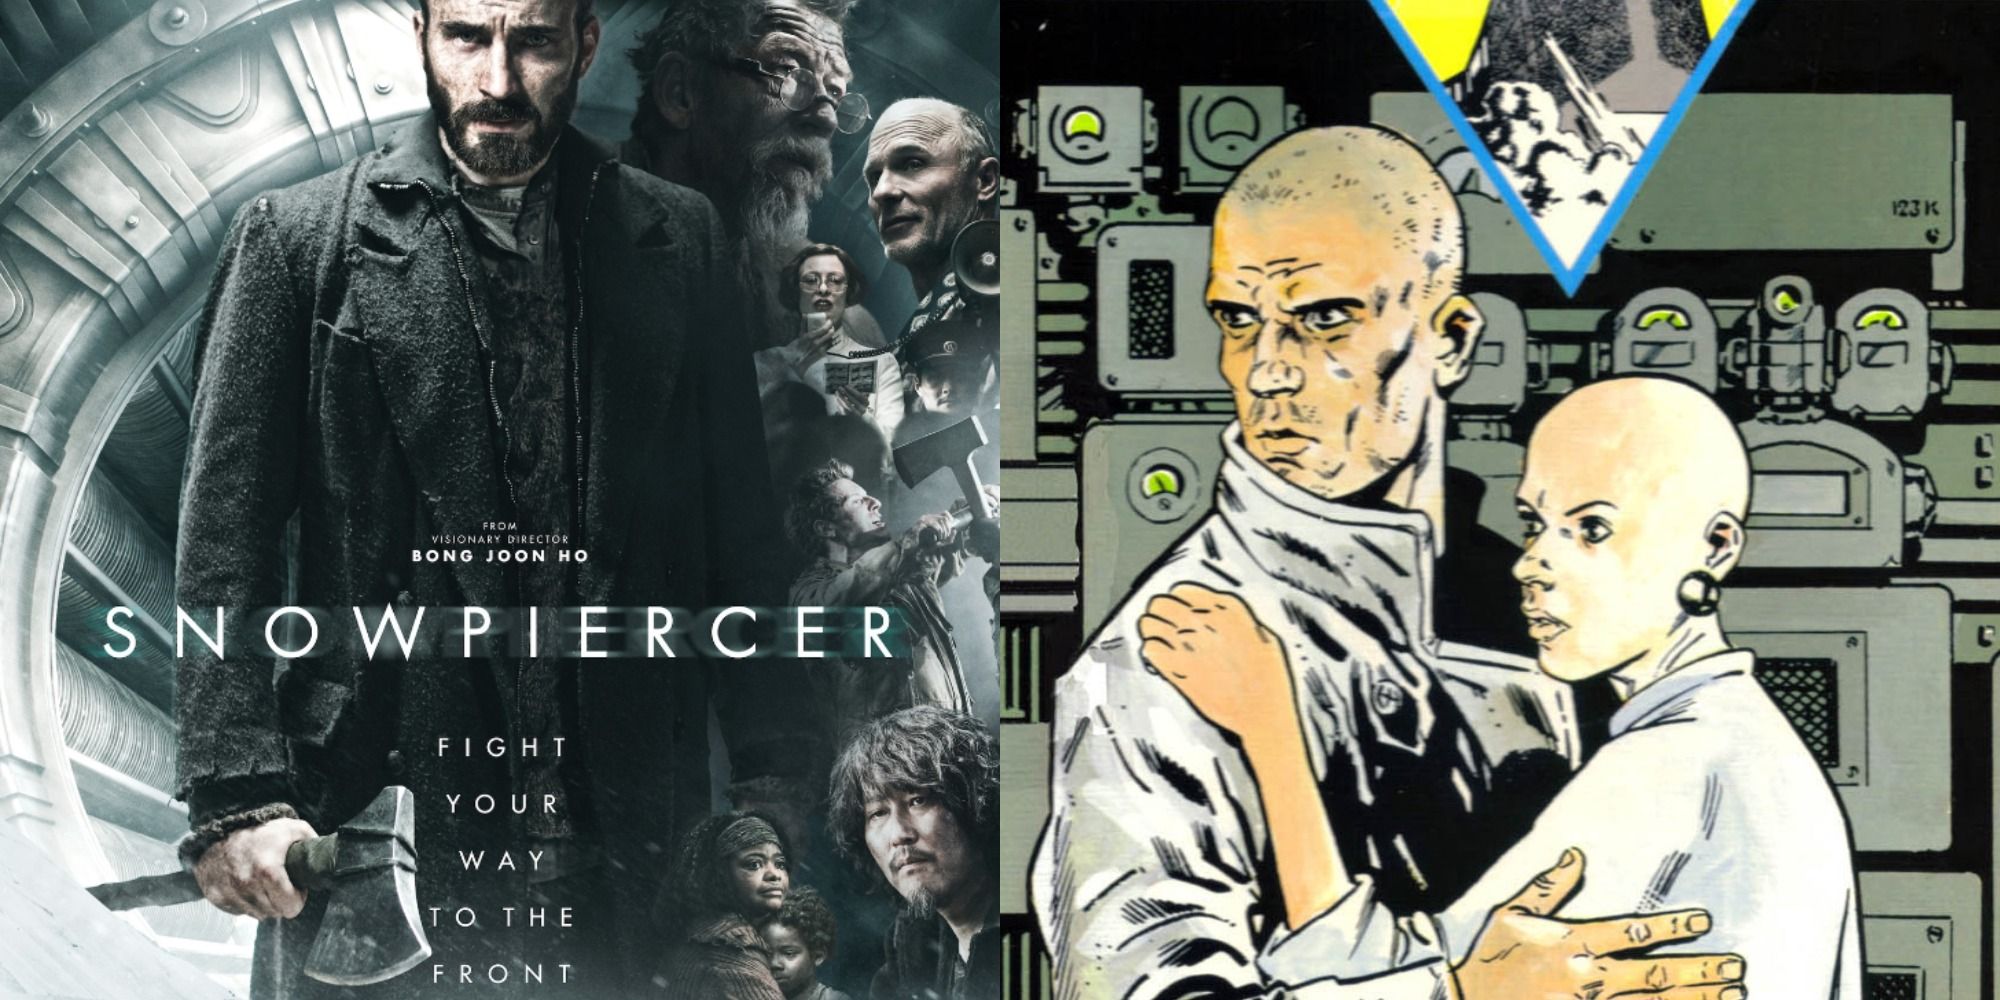 combined image of the poster of Snowpiercer and the graphic novel it is based on, Le Transperceneige